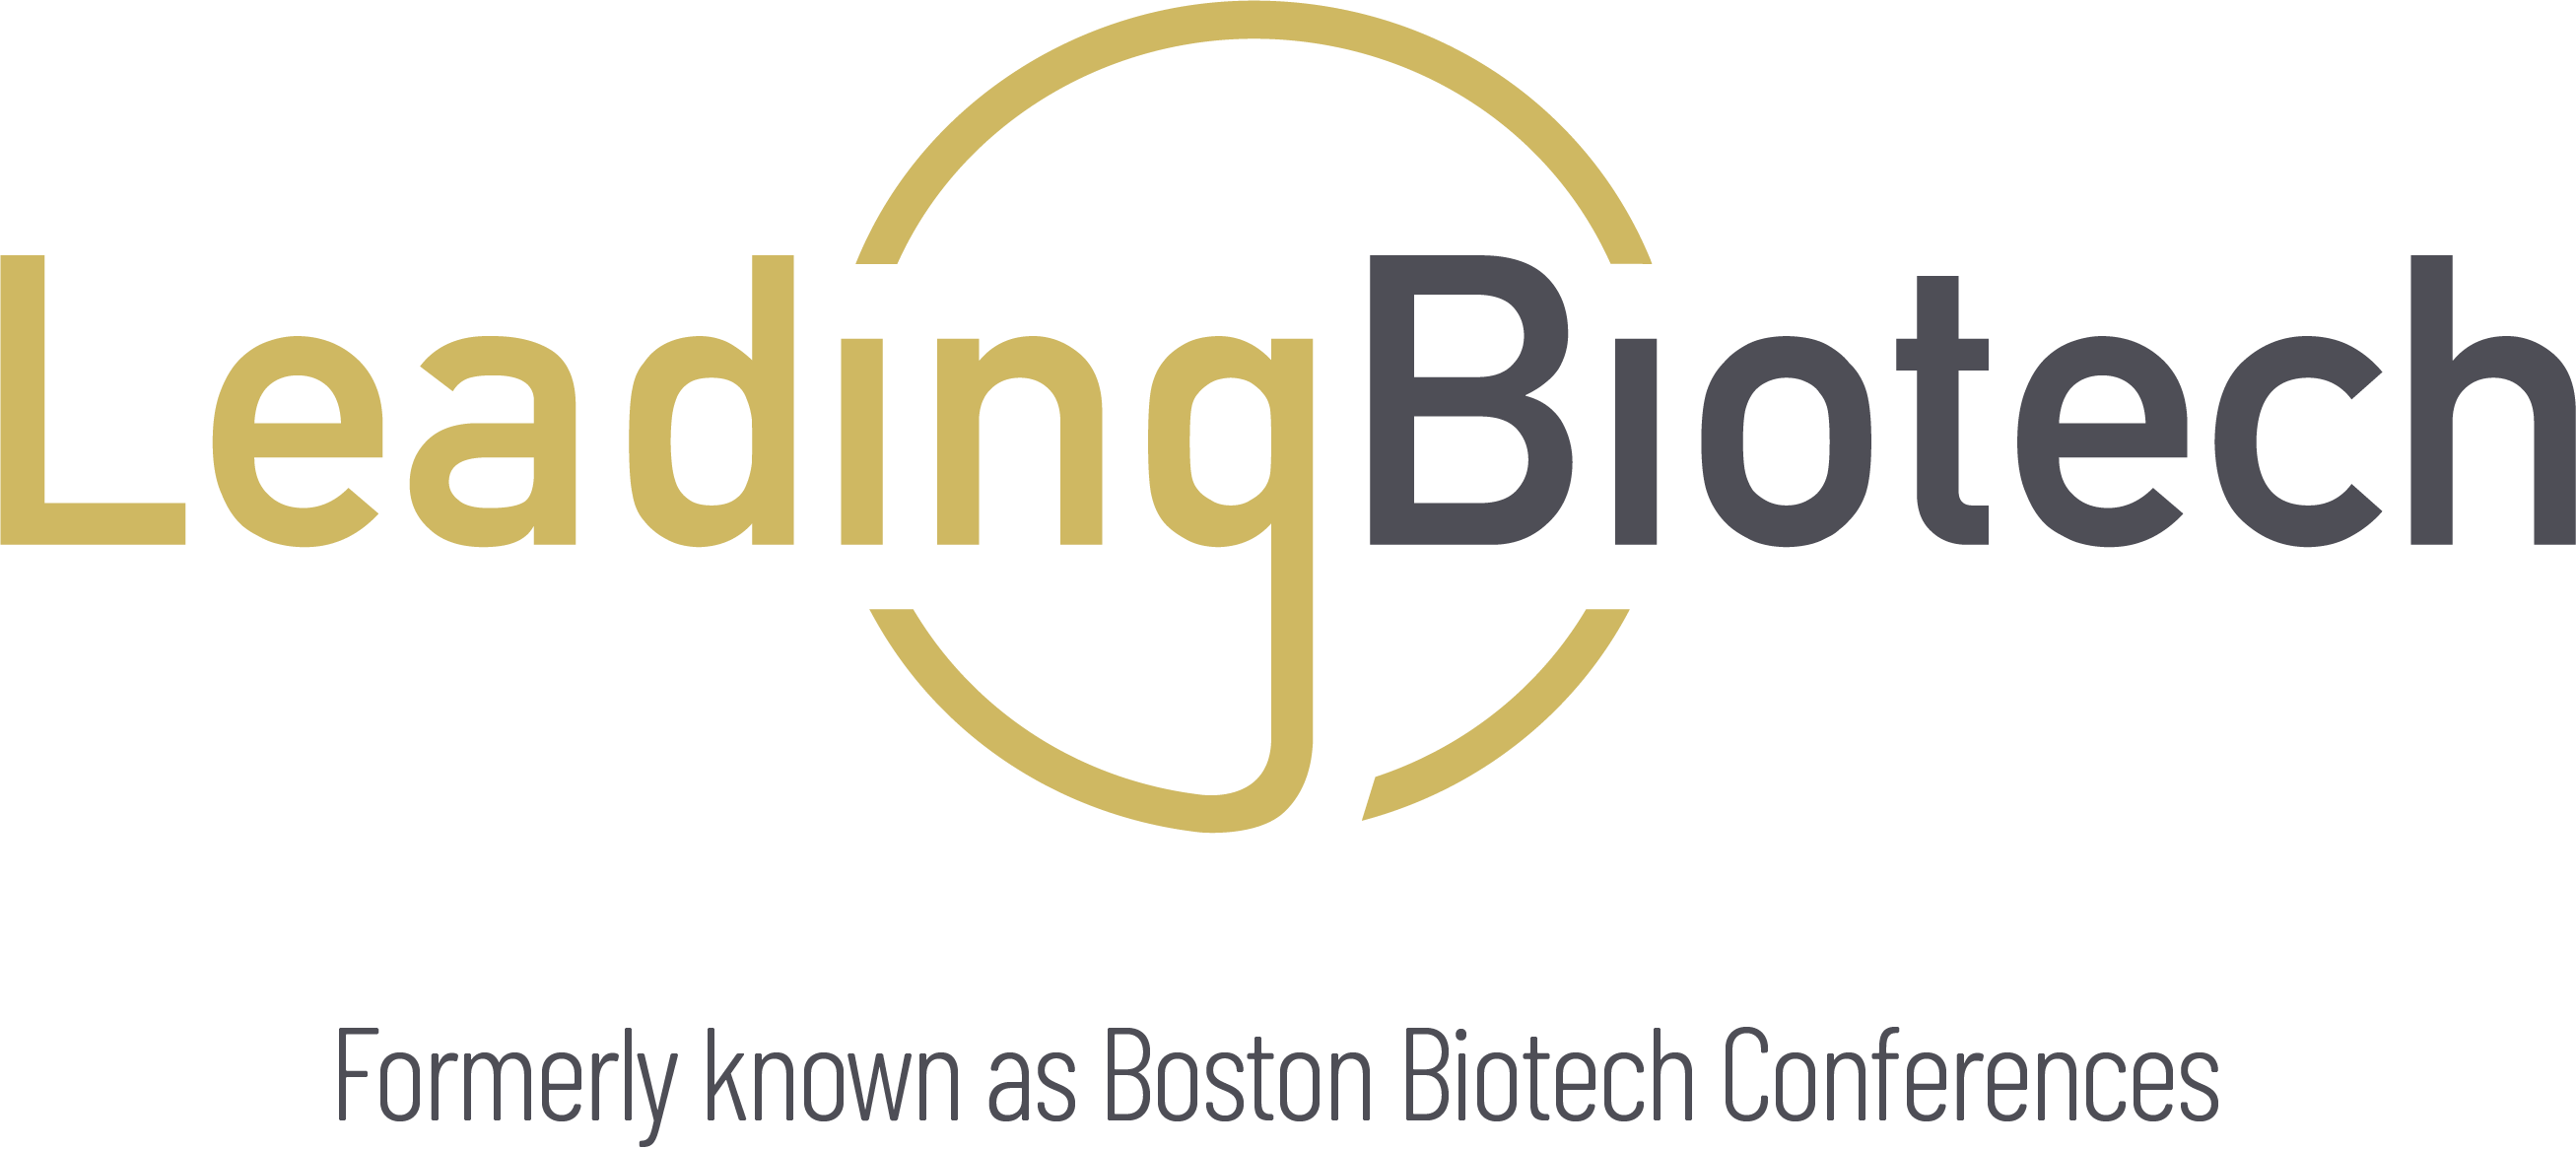 Boston Biotech Conferences Officially Announces Its New Name as